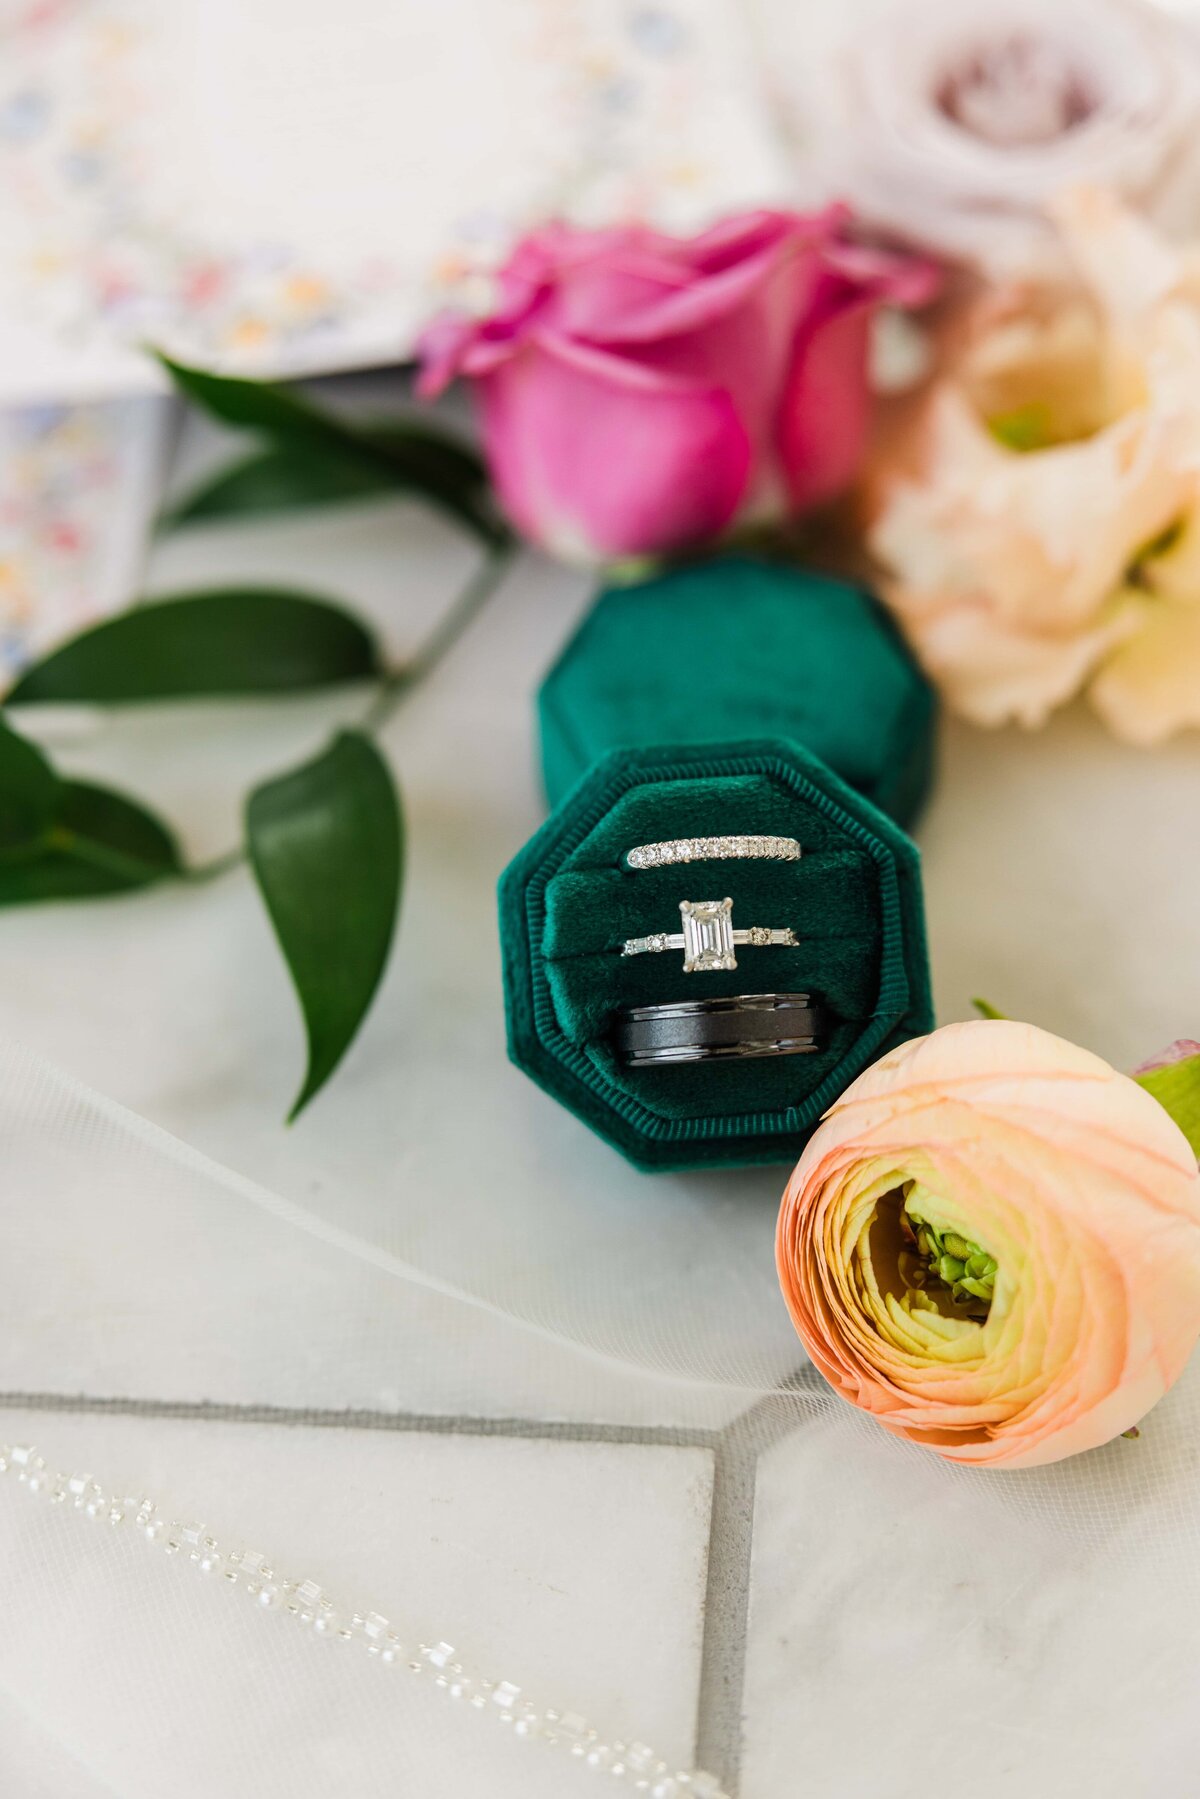 An elegant engagement ring inside a green velvet box surrounded by colorful flowers and a wedding invitation, meticulously arranged by a top wedding planner from Des Moines.